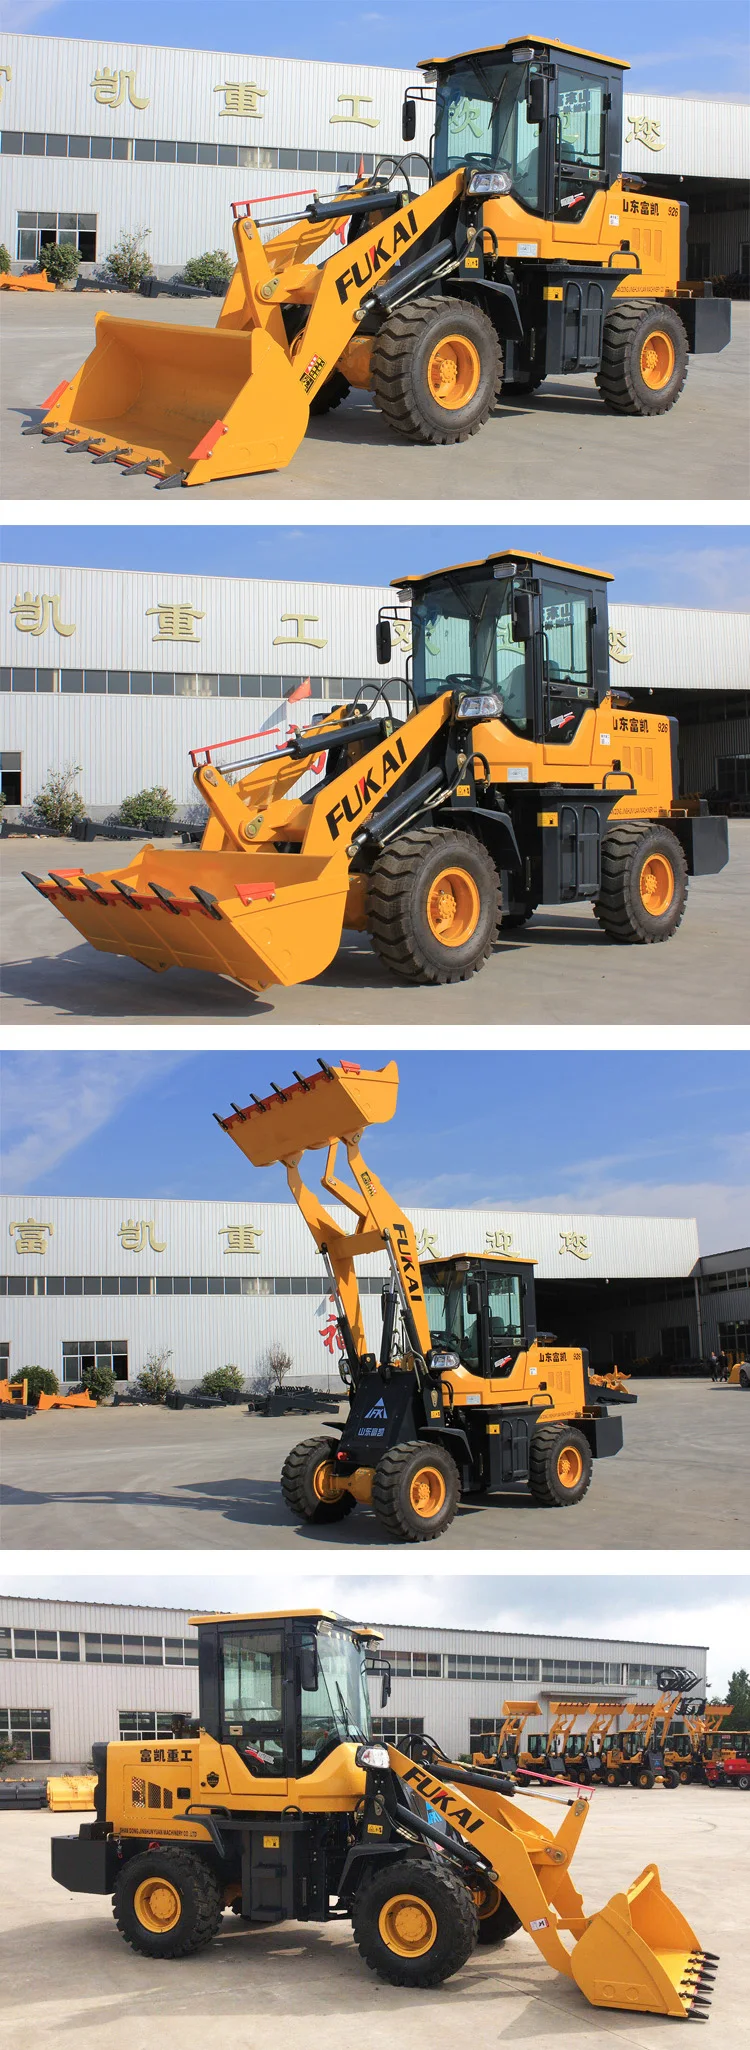 Zl926 Avant Mini Front End Electric Wheel Loader With Wheel Loader Spare Parts Good Price For Sale Buy Wheel Loader Mini Loader Front End Loader Product On Alibaba Com